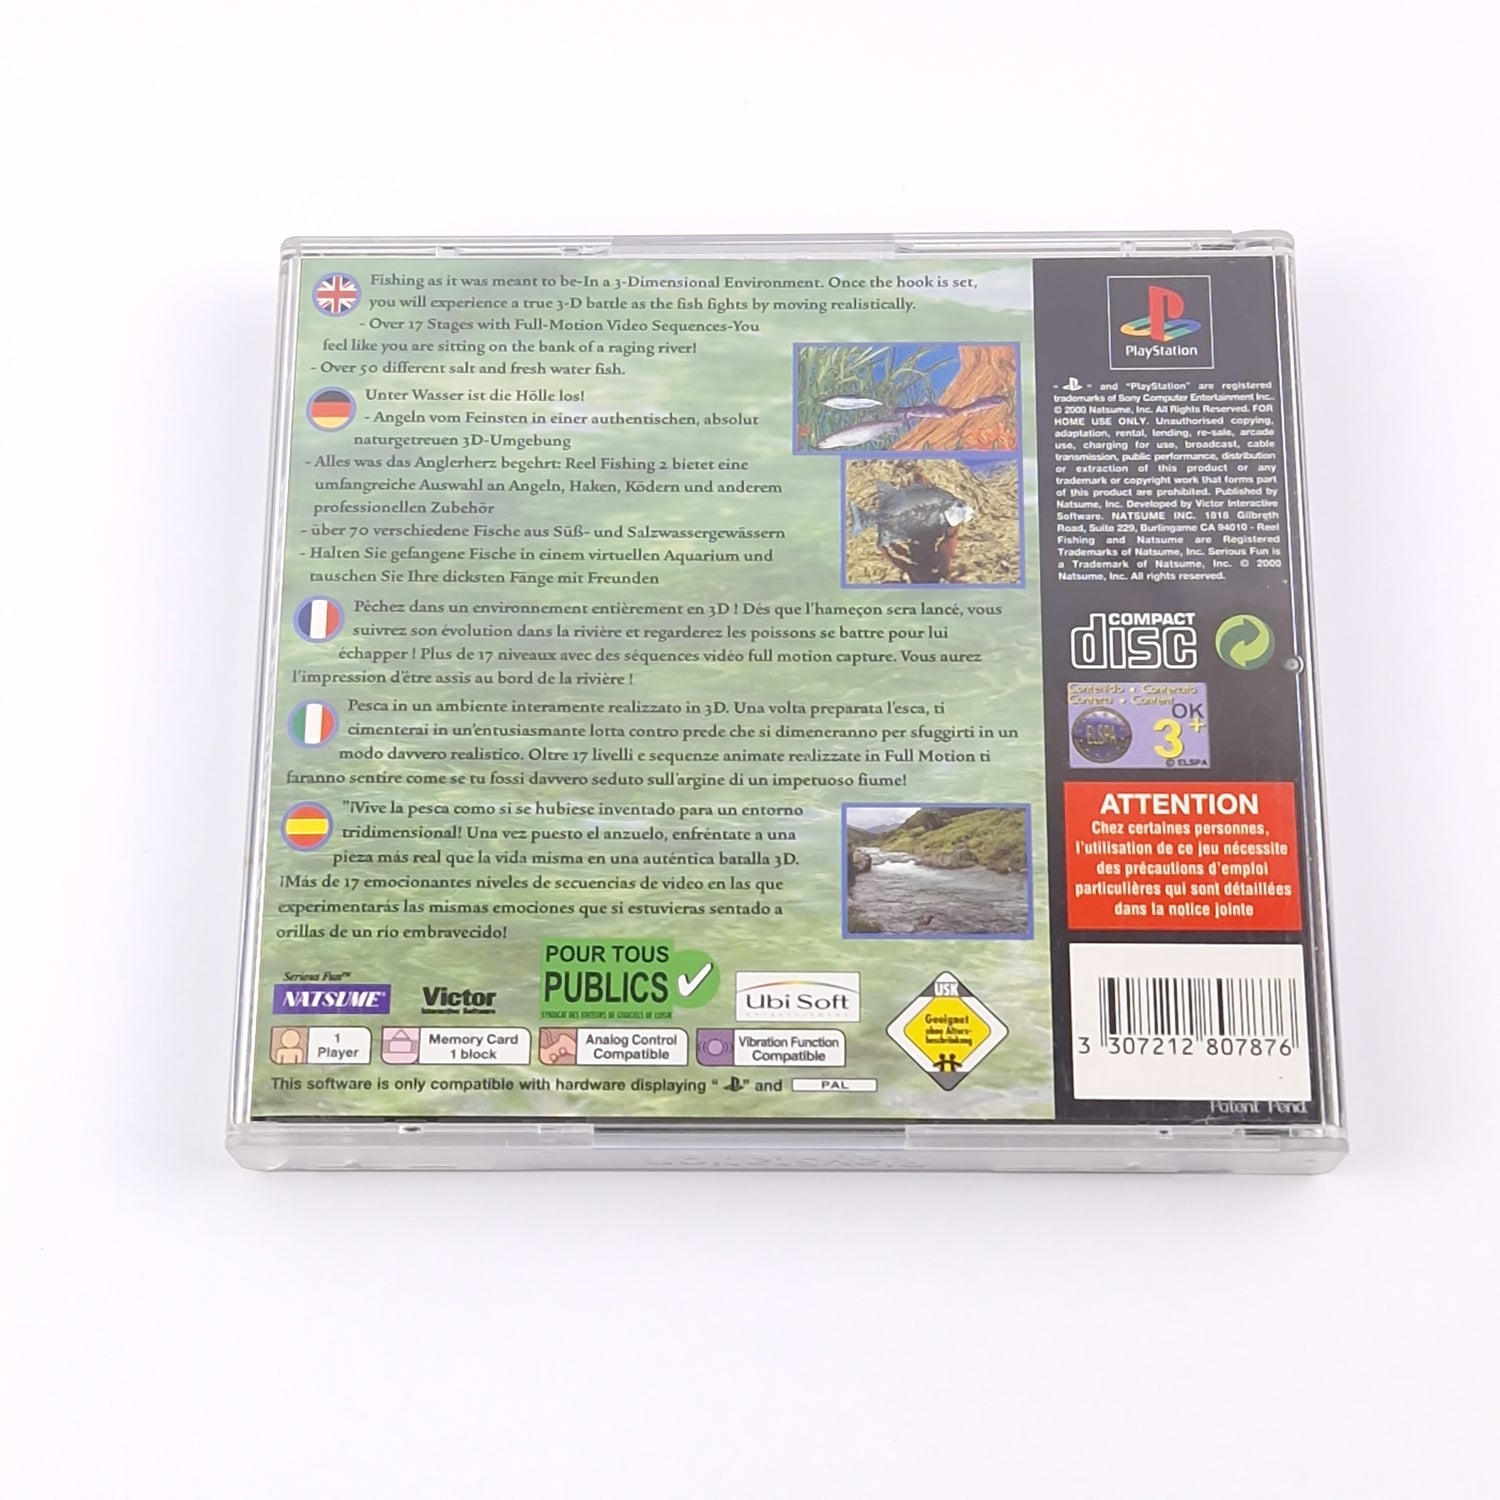 Sony Playstation 1 Game: Reel Fishing II 2 - OVP Instructions - PS1 PSX PAL